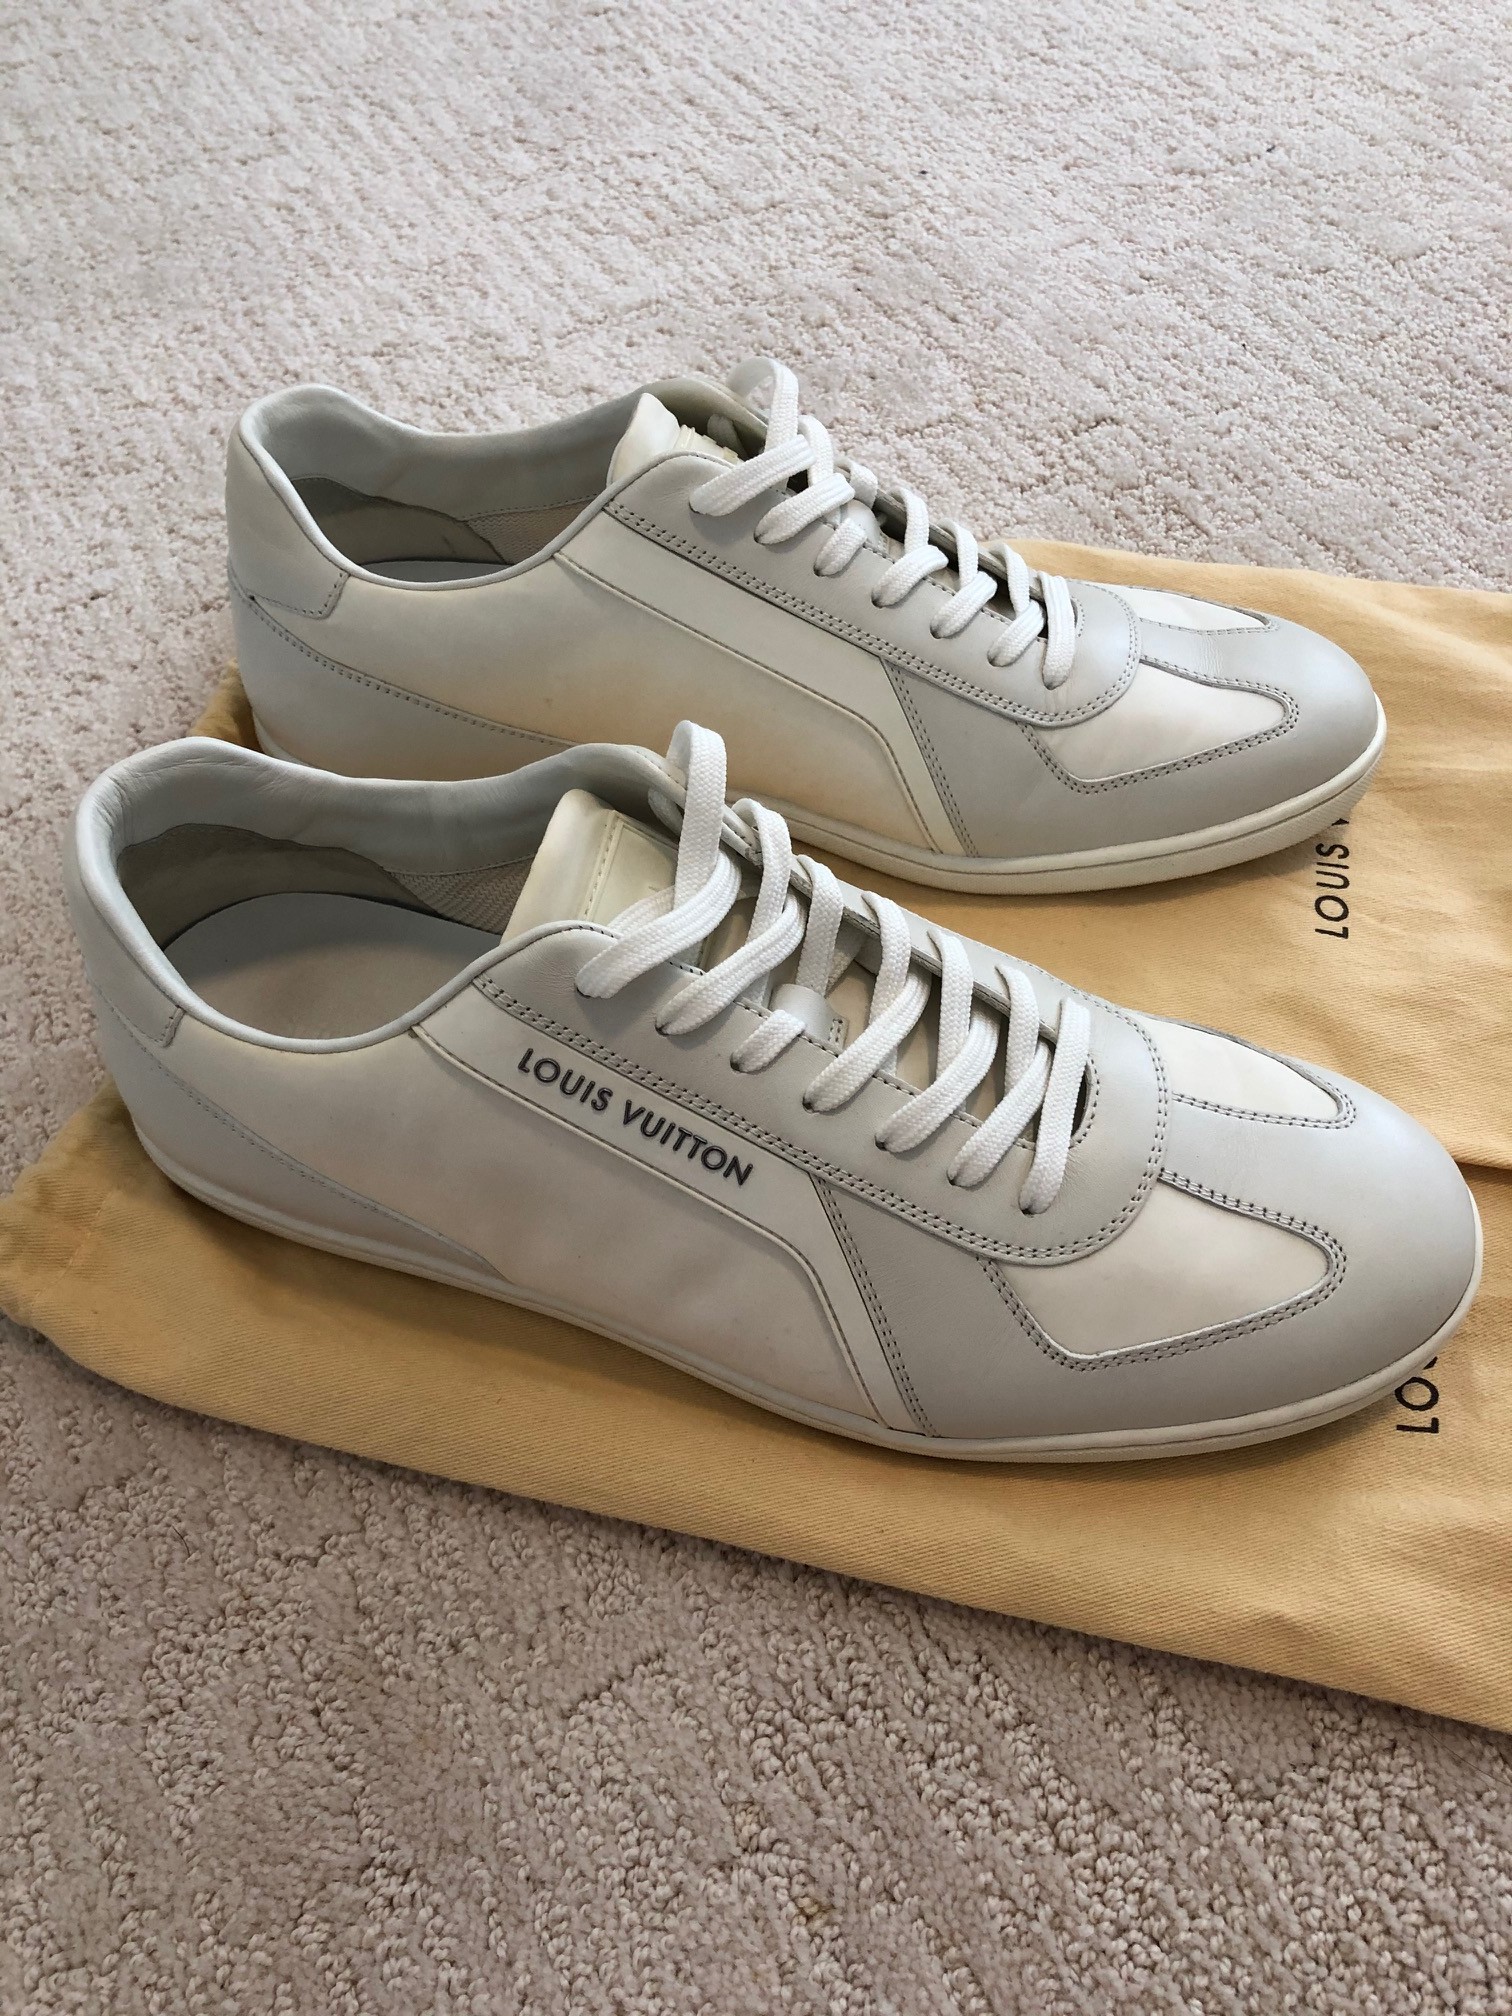 Louis Vuitton Run away leather trainers white